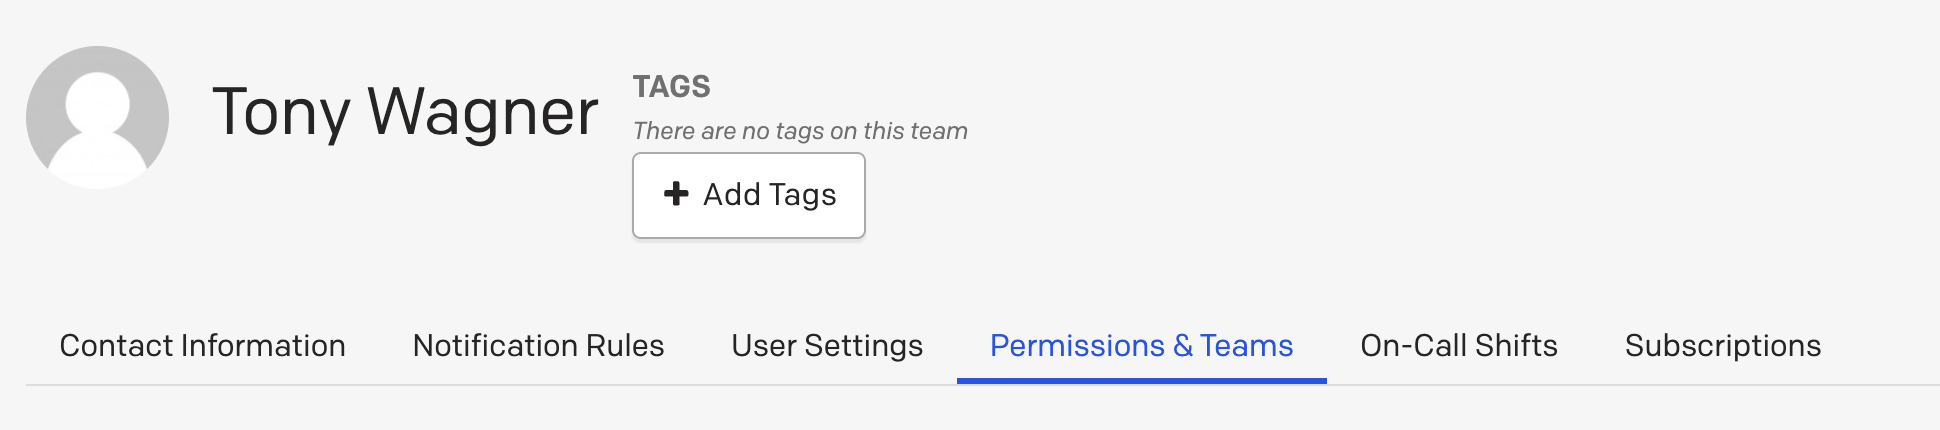 Account with Advanced Permissions